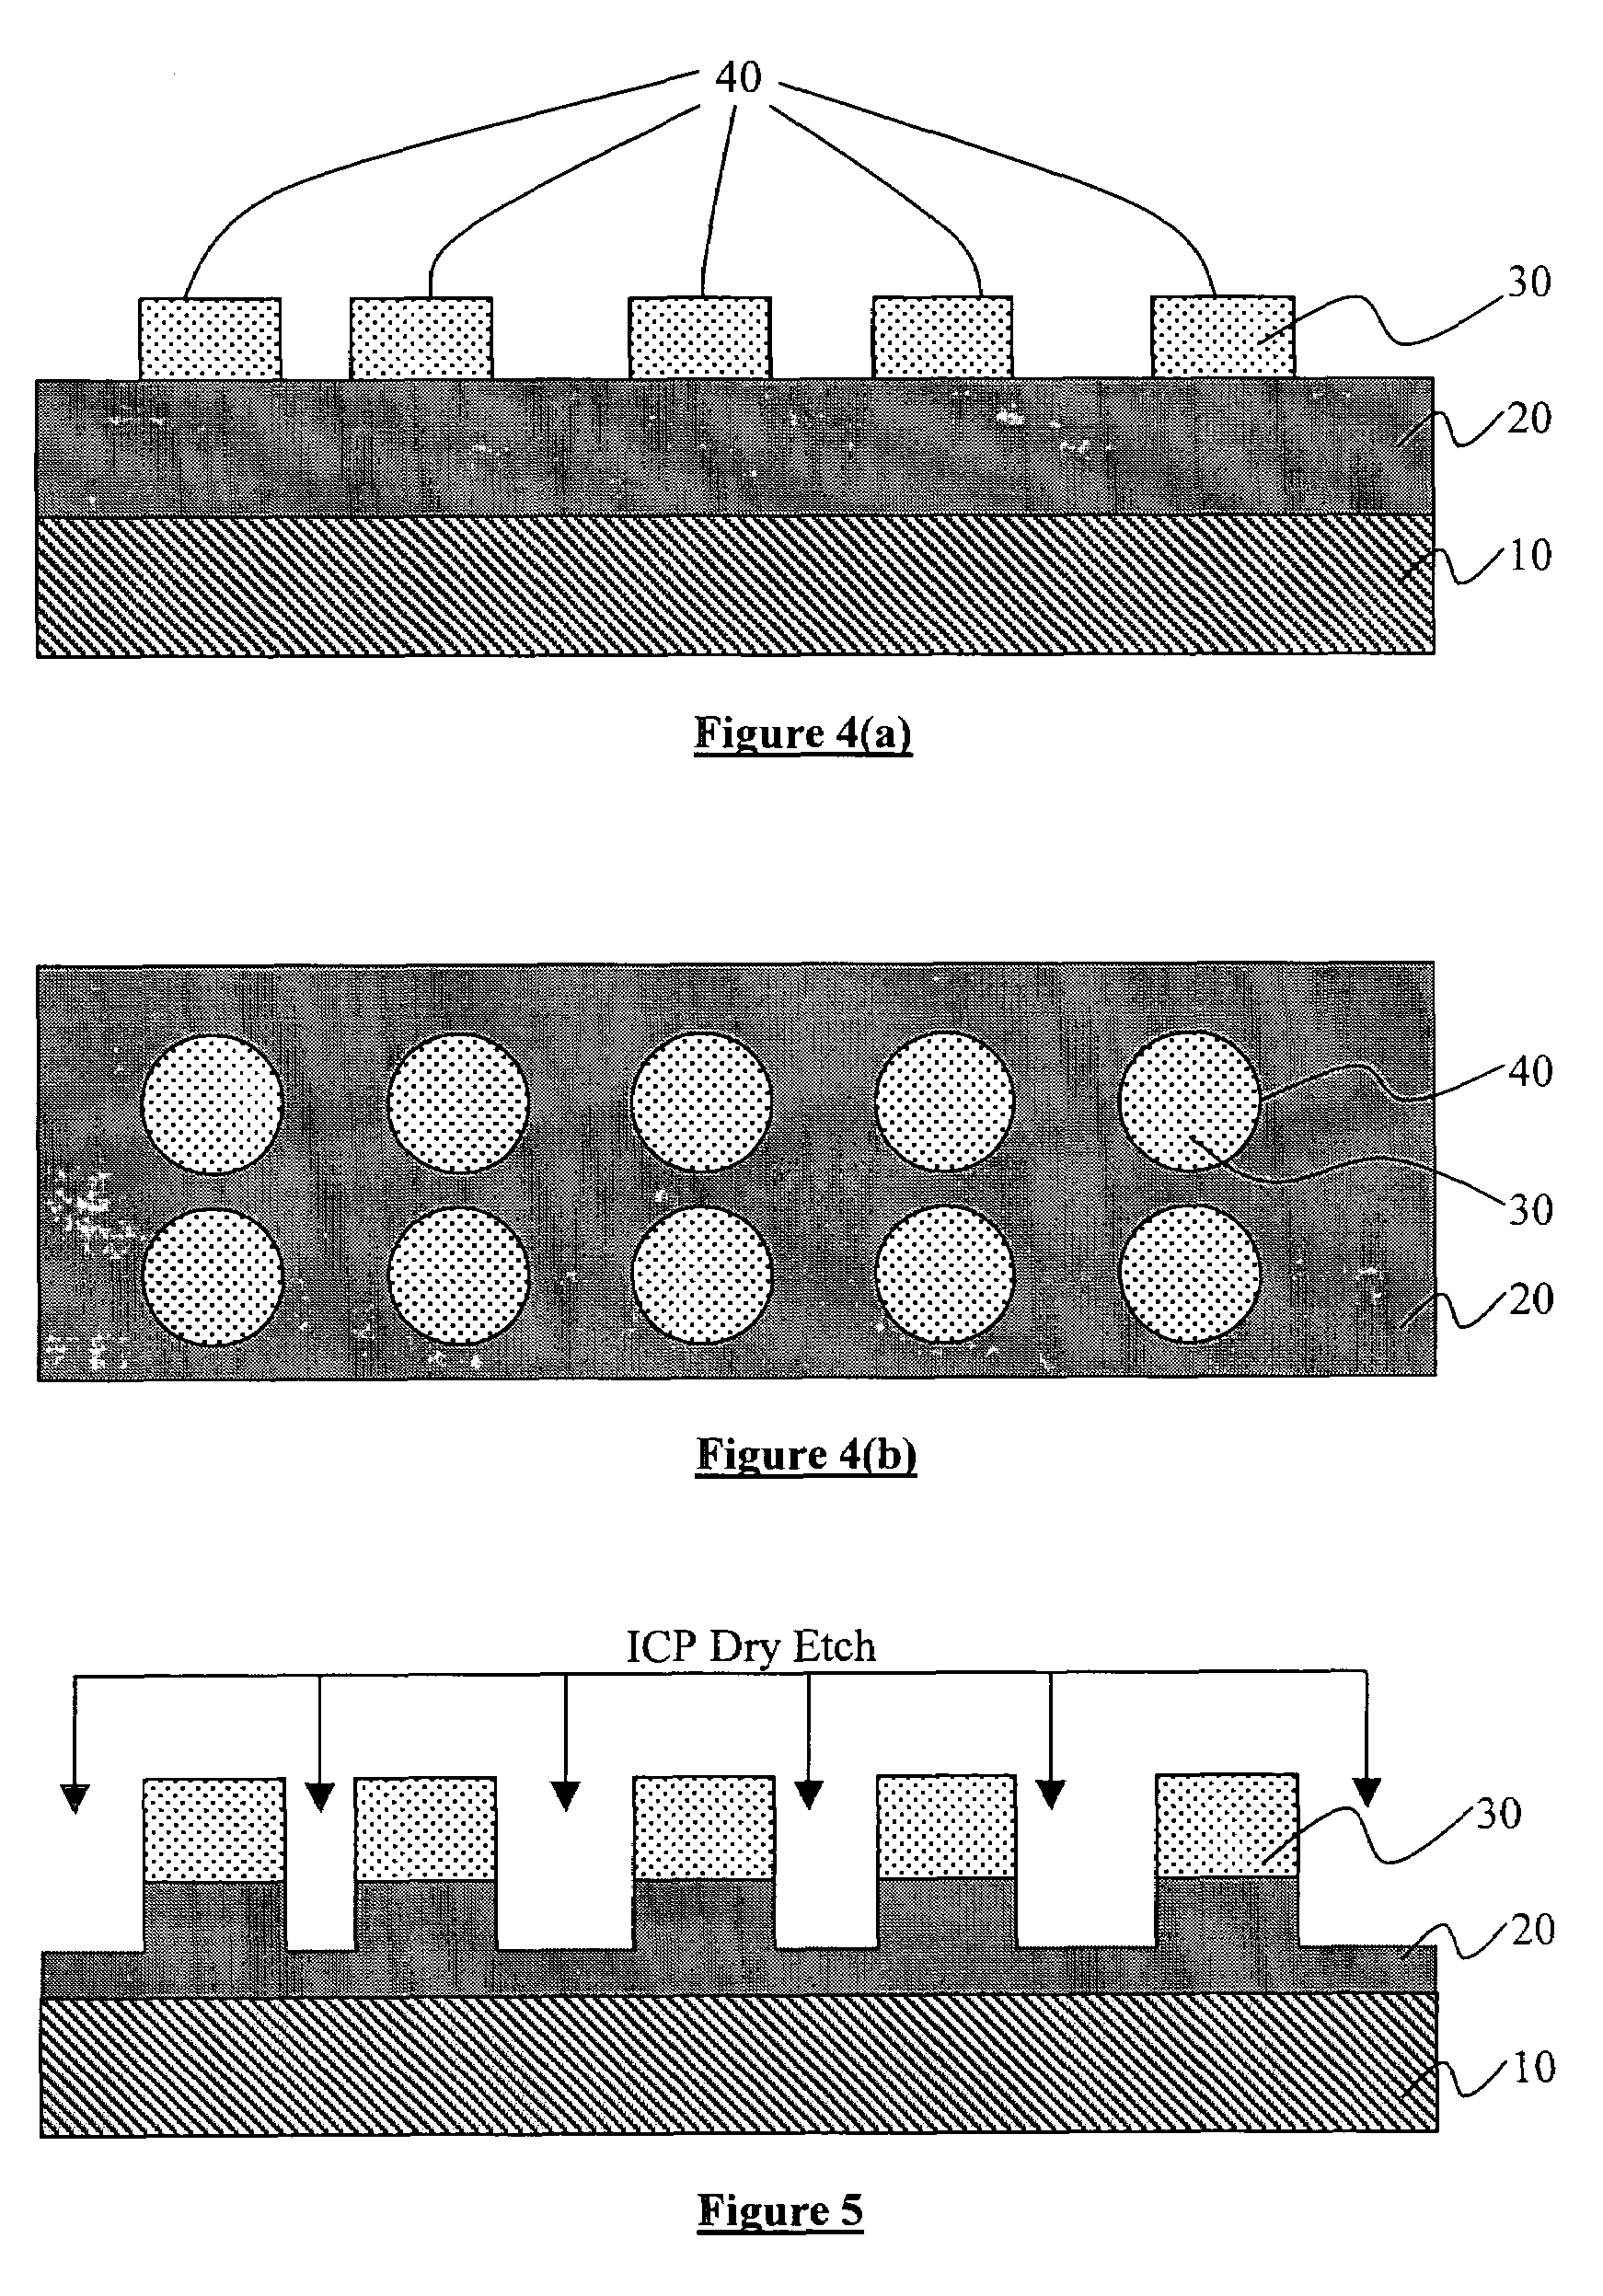 Method of fabricating sub-100 nanometer field emitter tips comprising group III-nitride semiconductors